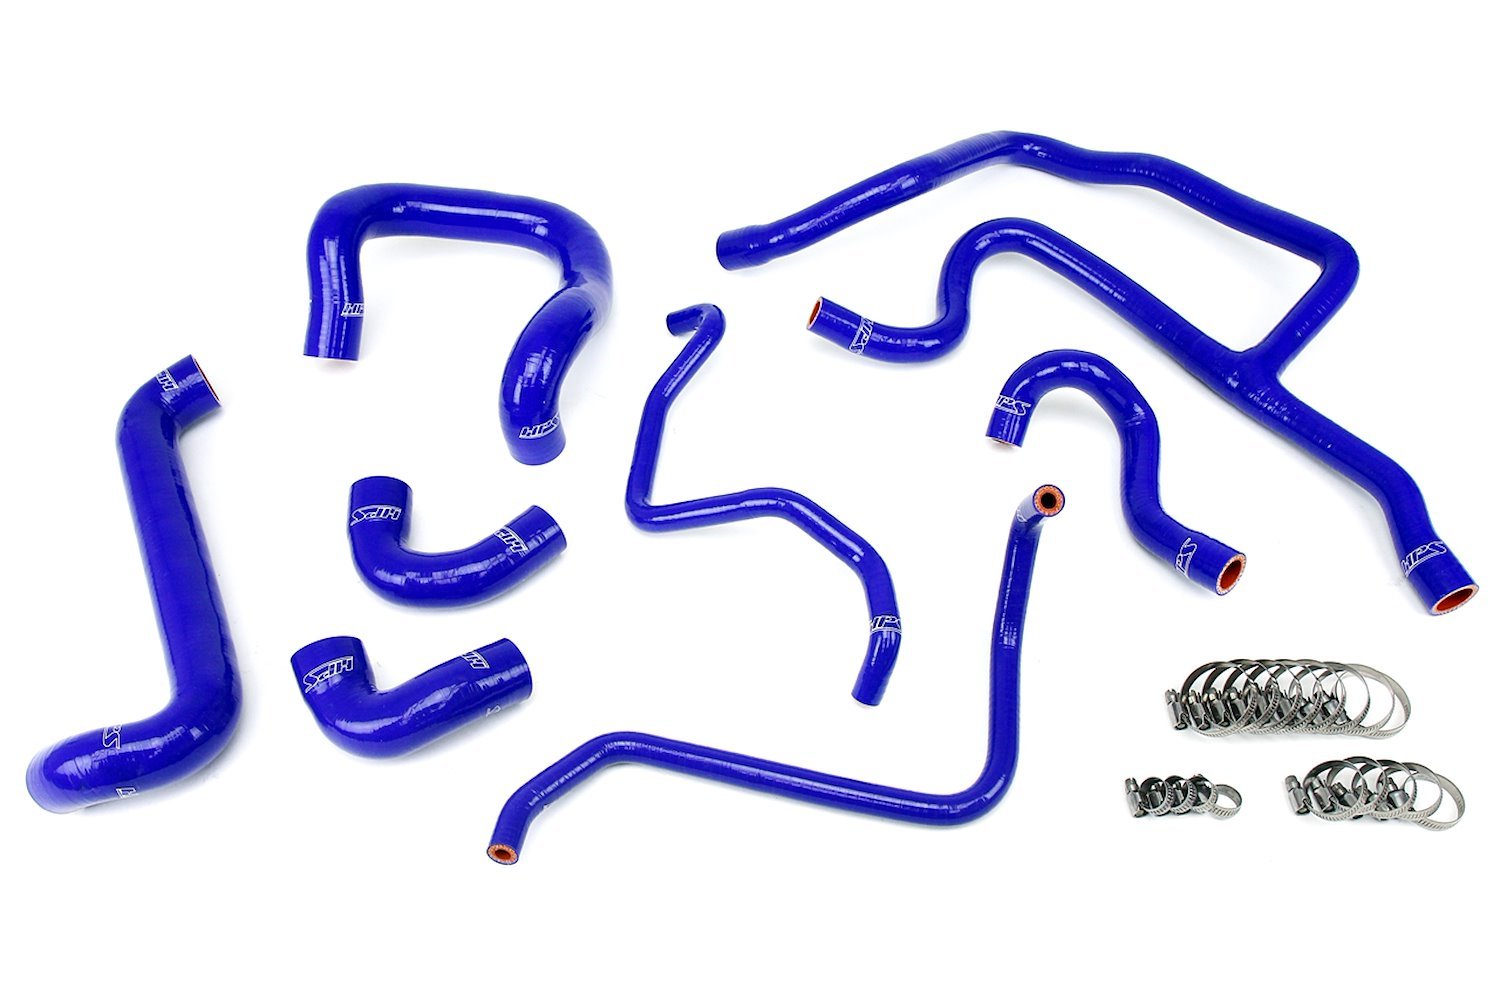 57-1427-BLUE Coolant Hose Kit, High-Temp 3-Ply Reinforced Silicone, Replace Rubber Radiator Heater Coolant Hoses